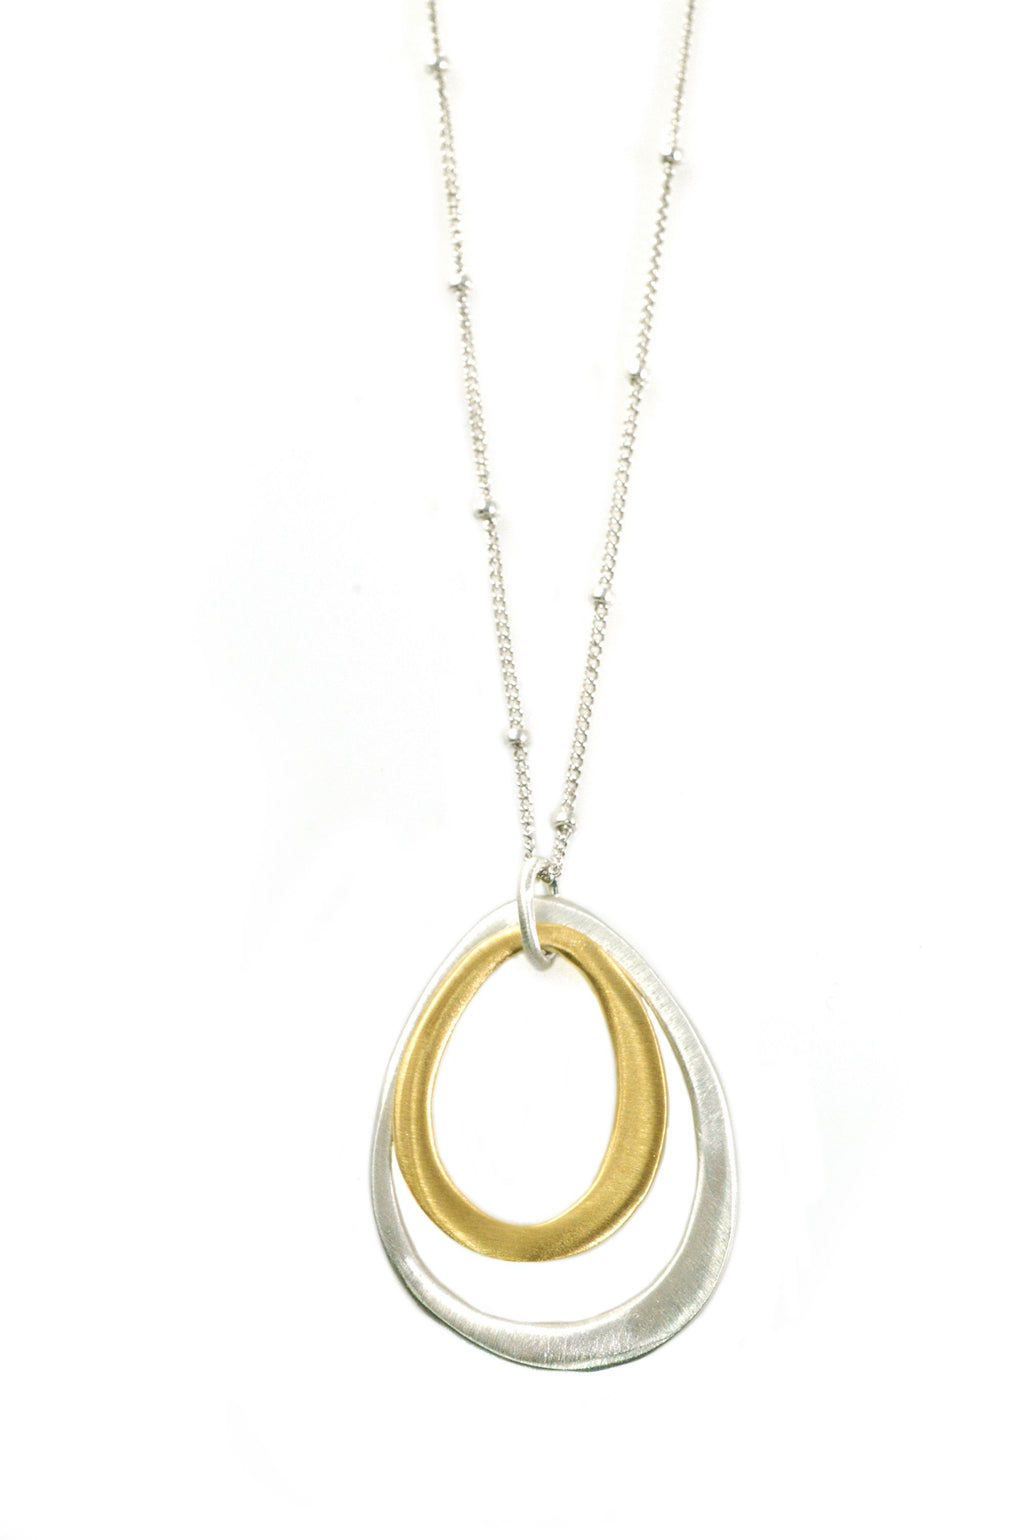 Silver and Vermeil Oval Pendants